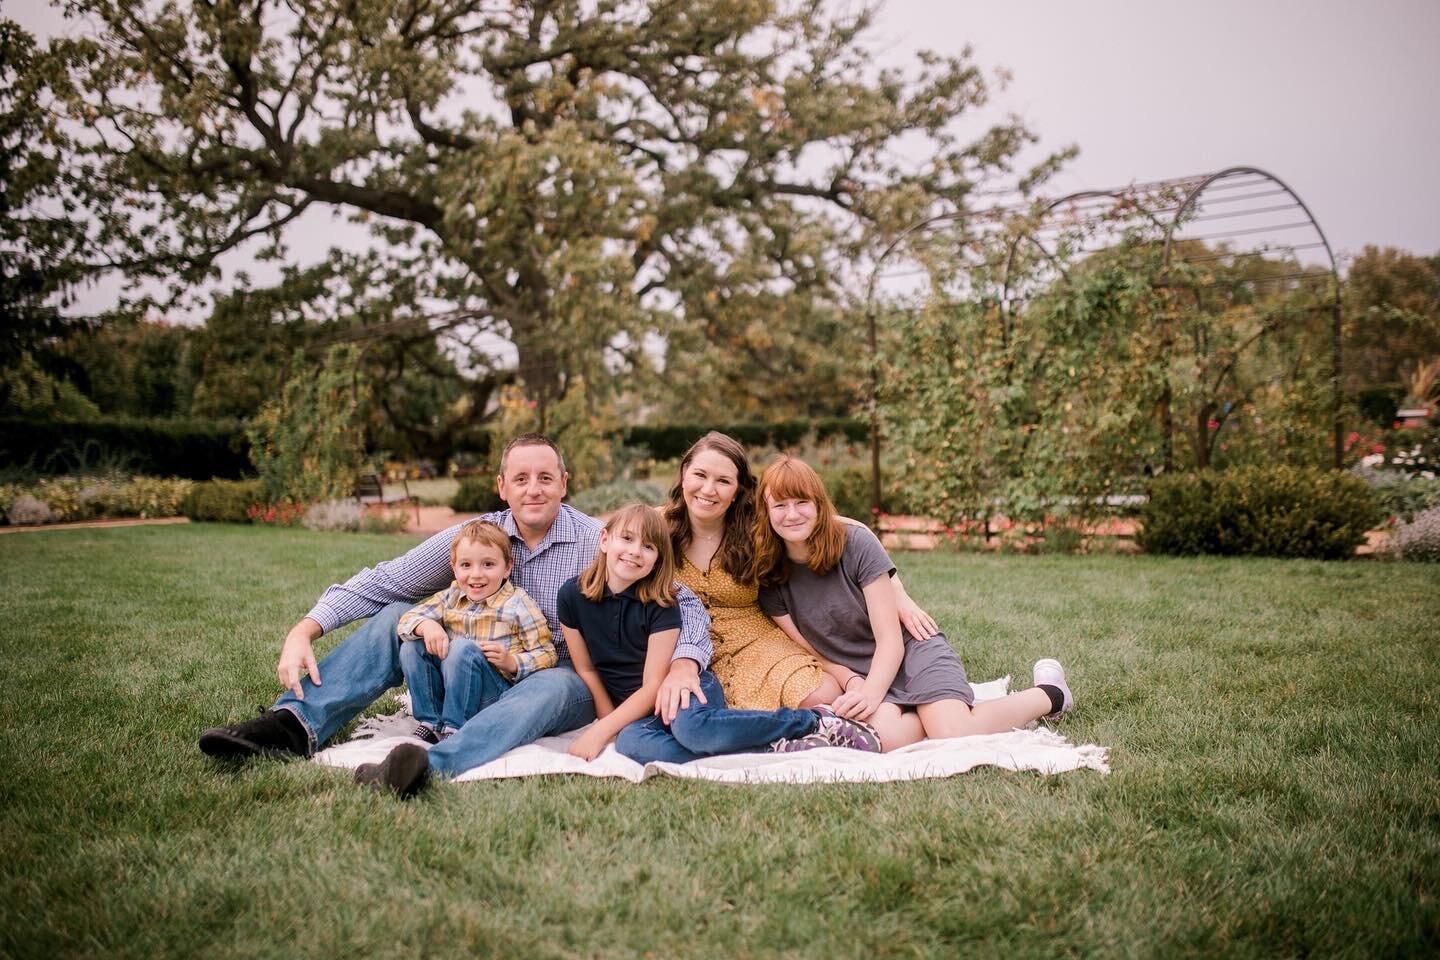 Fall family photo fun with the Orelove squad! I&rsquo;ve known these kiddos since they were born, and I am absolutely refusing to accept how grown up and mature they are. Where has the time gone? I am so glad we all got to catch up, and that they let